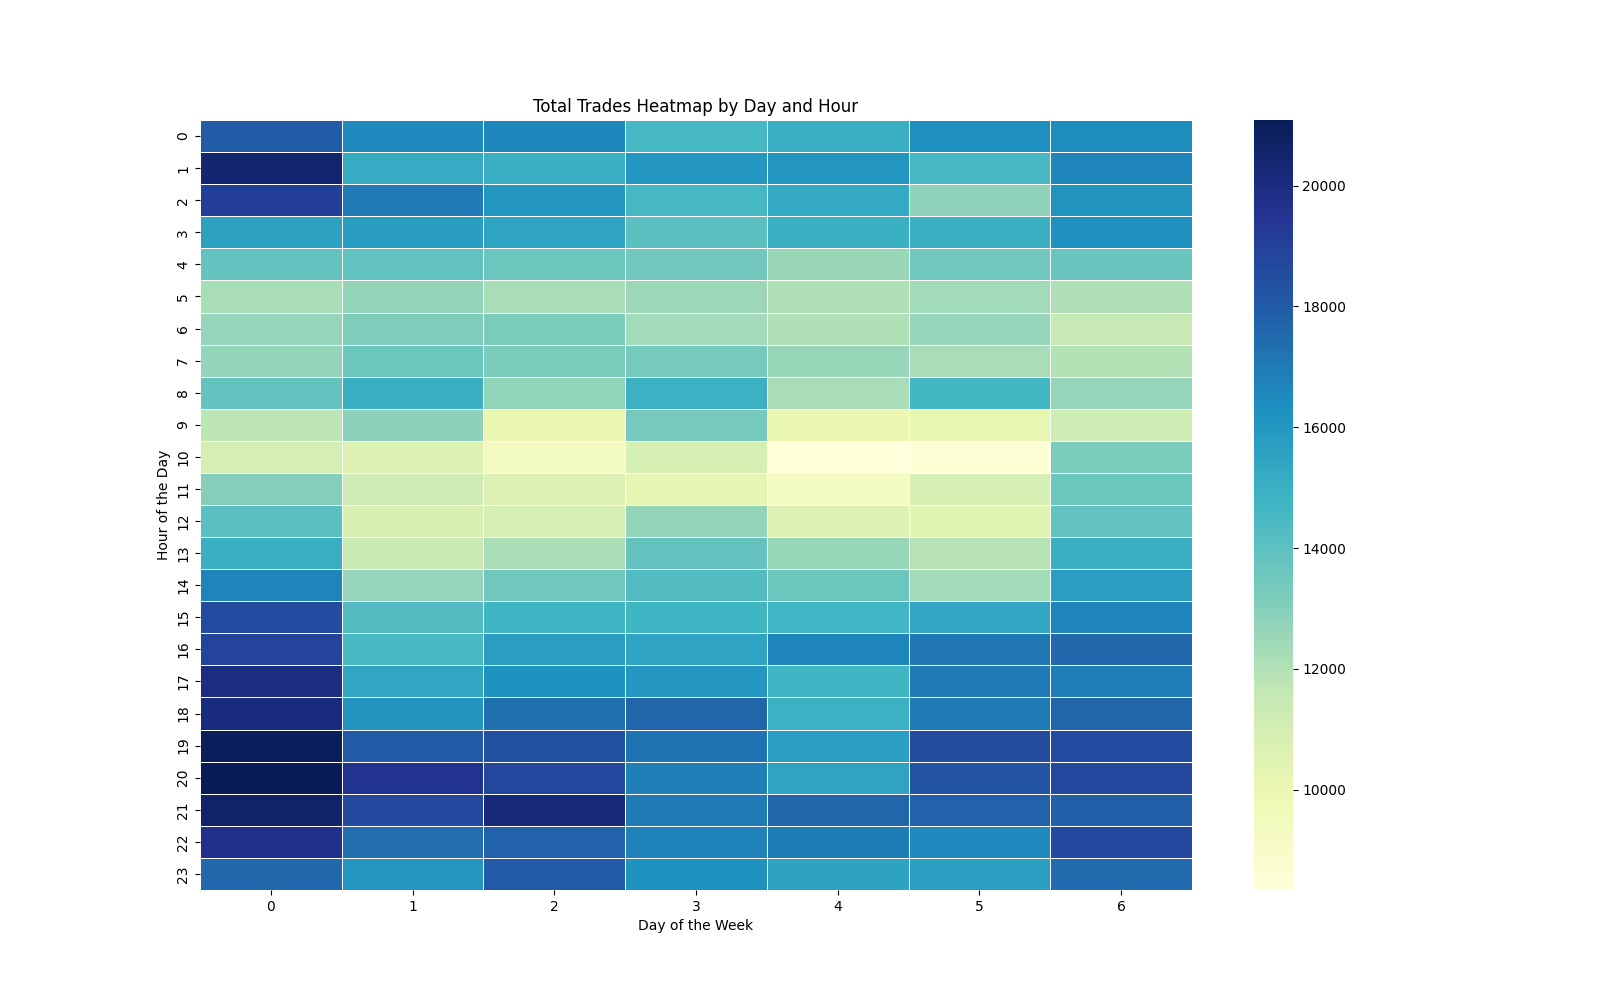 Trade count heatmap by day and hour